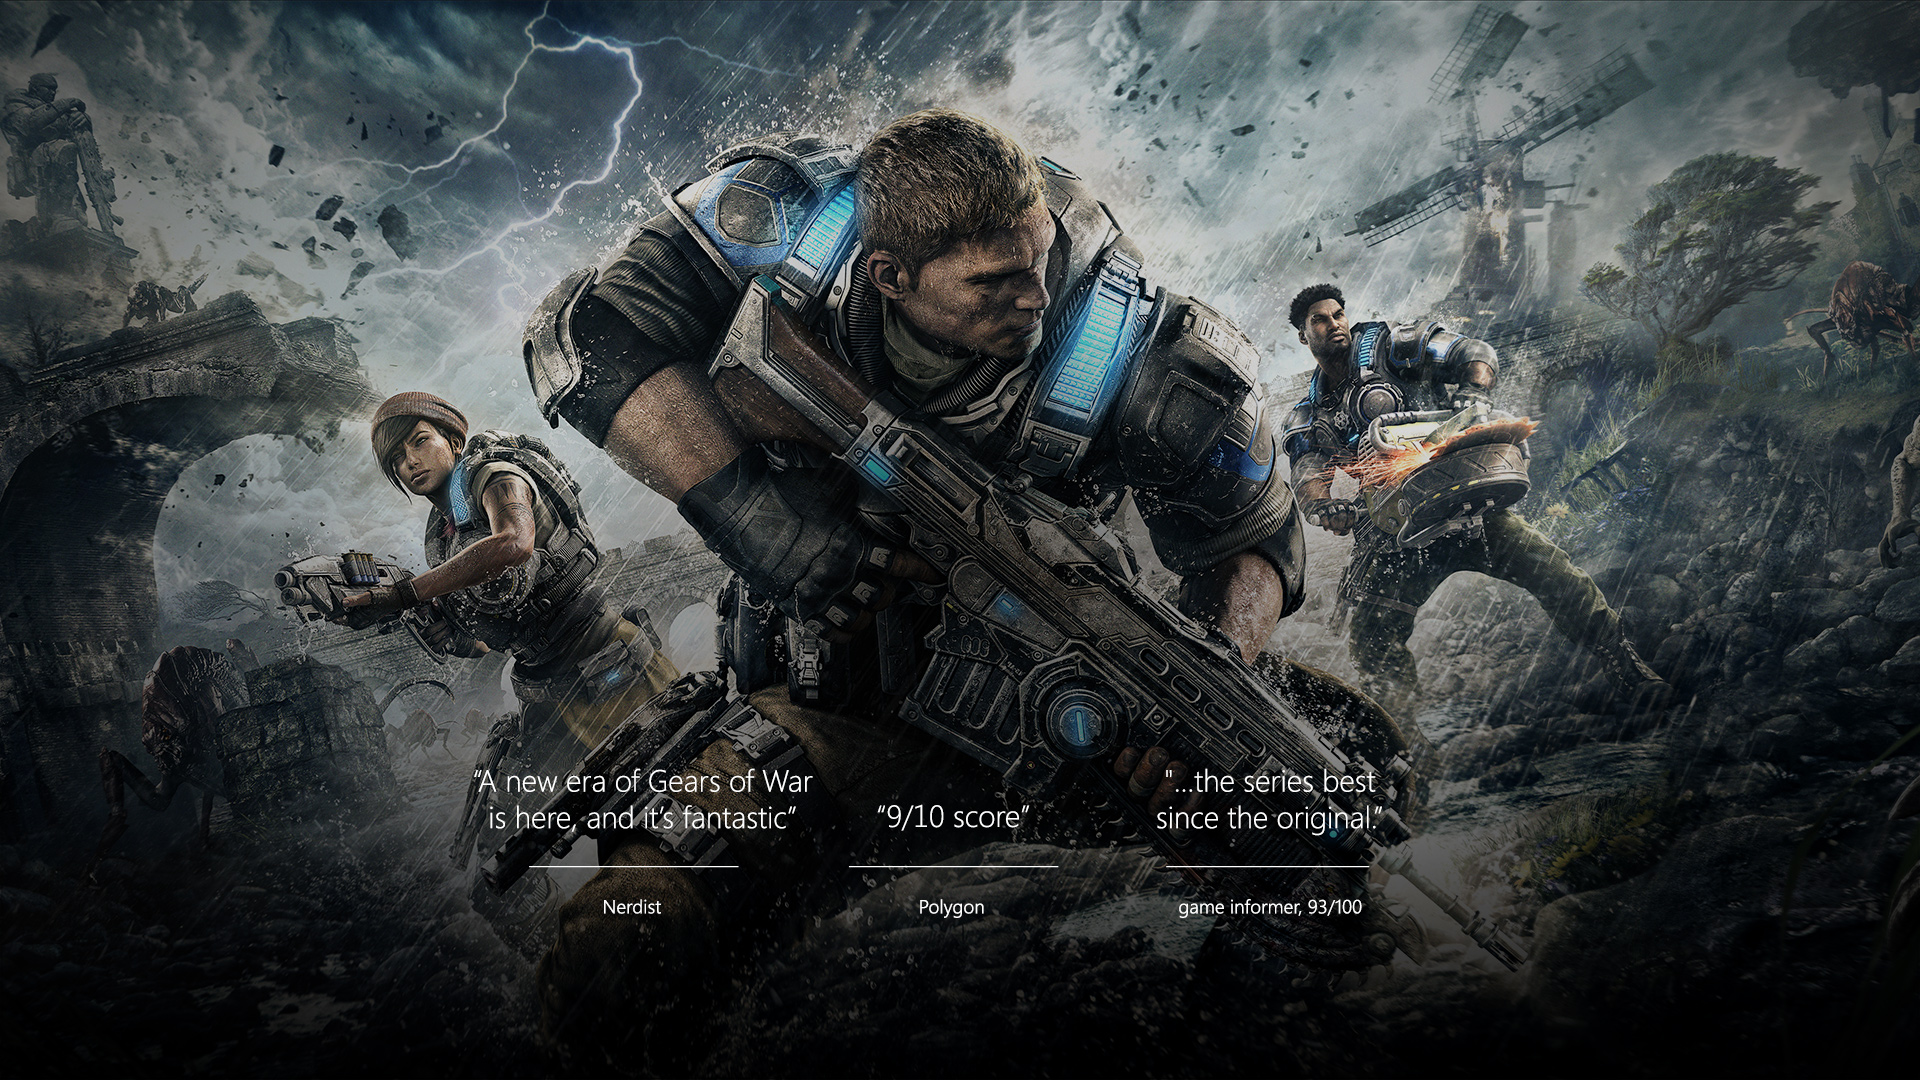 gears of war 4 xbox series x download free